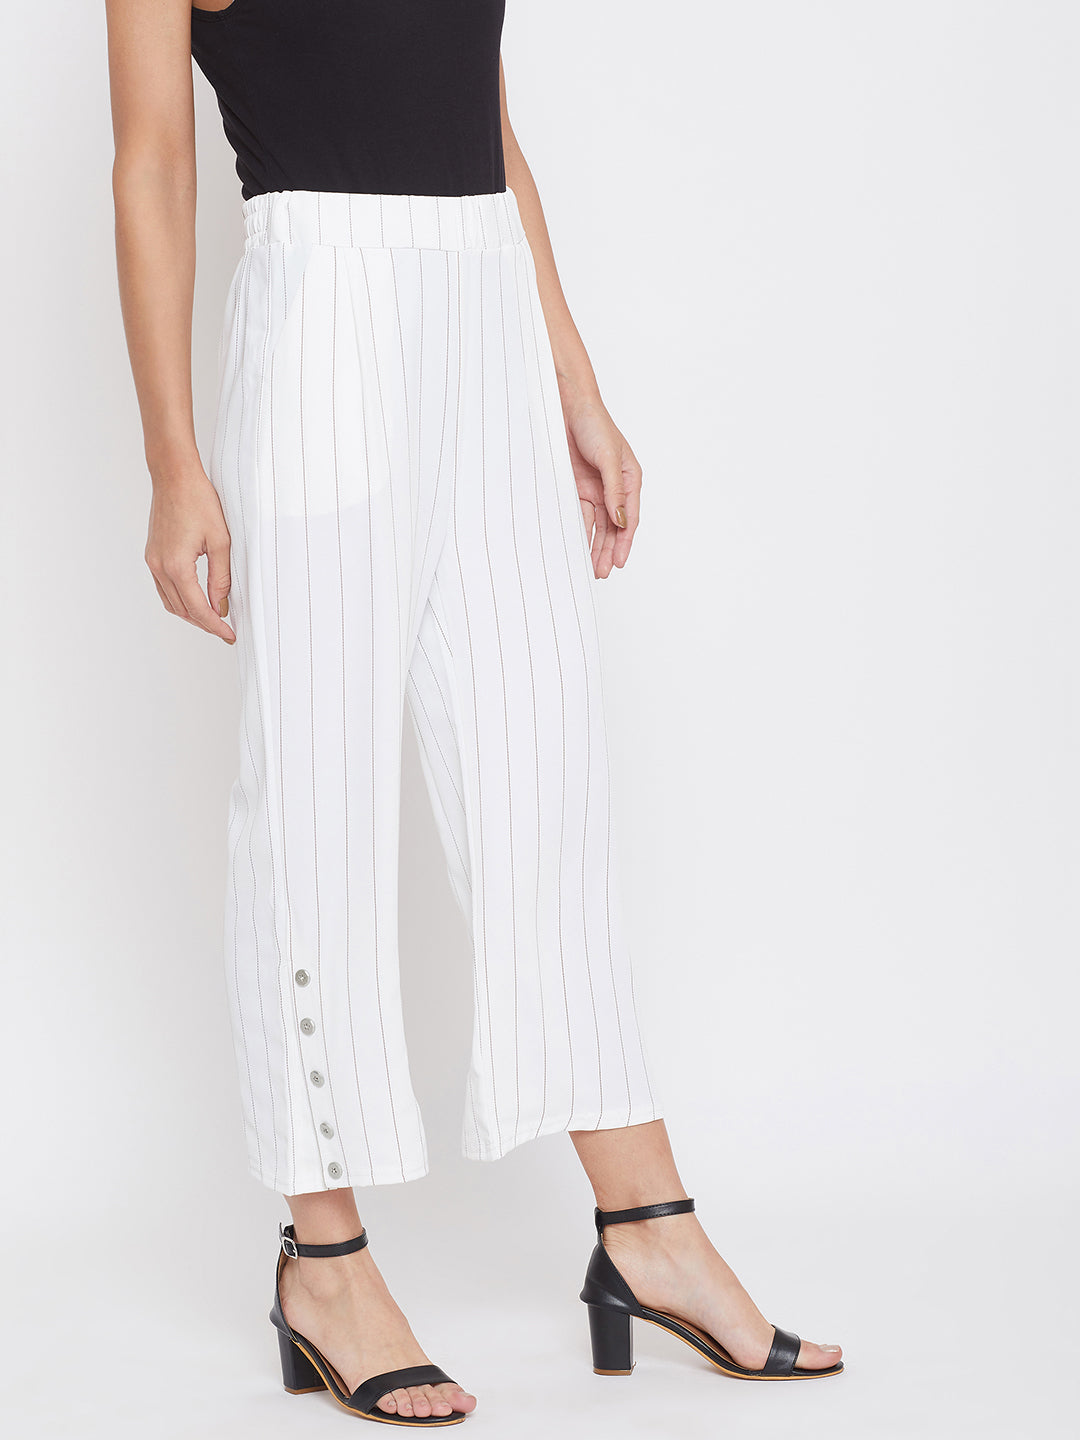 White Striped Flared Cotton Trousers - Women Trousers